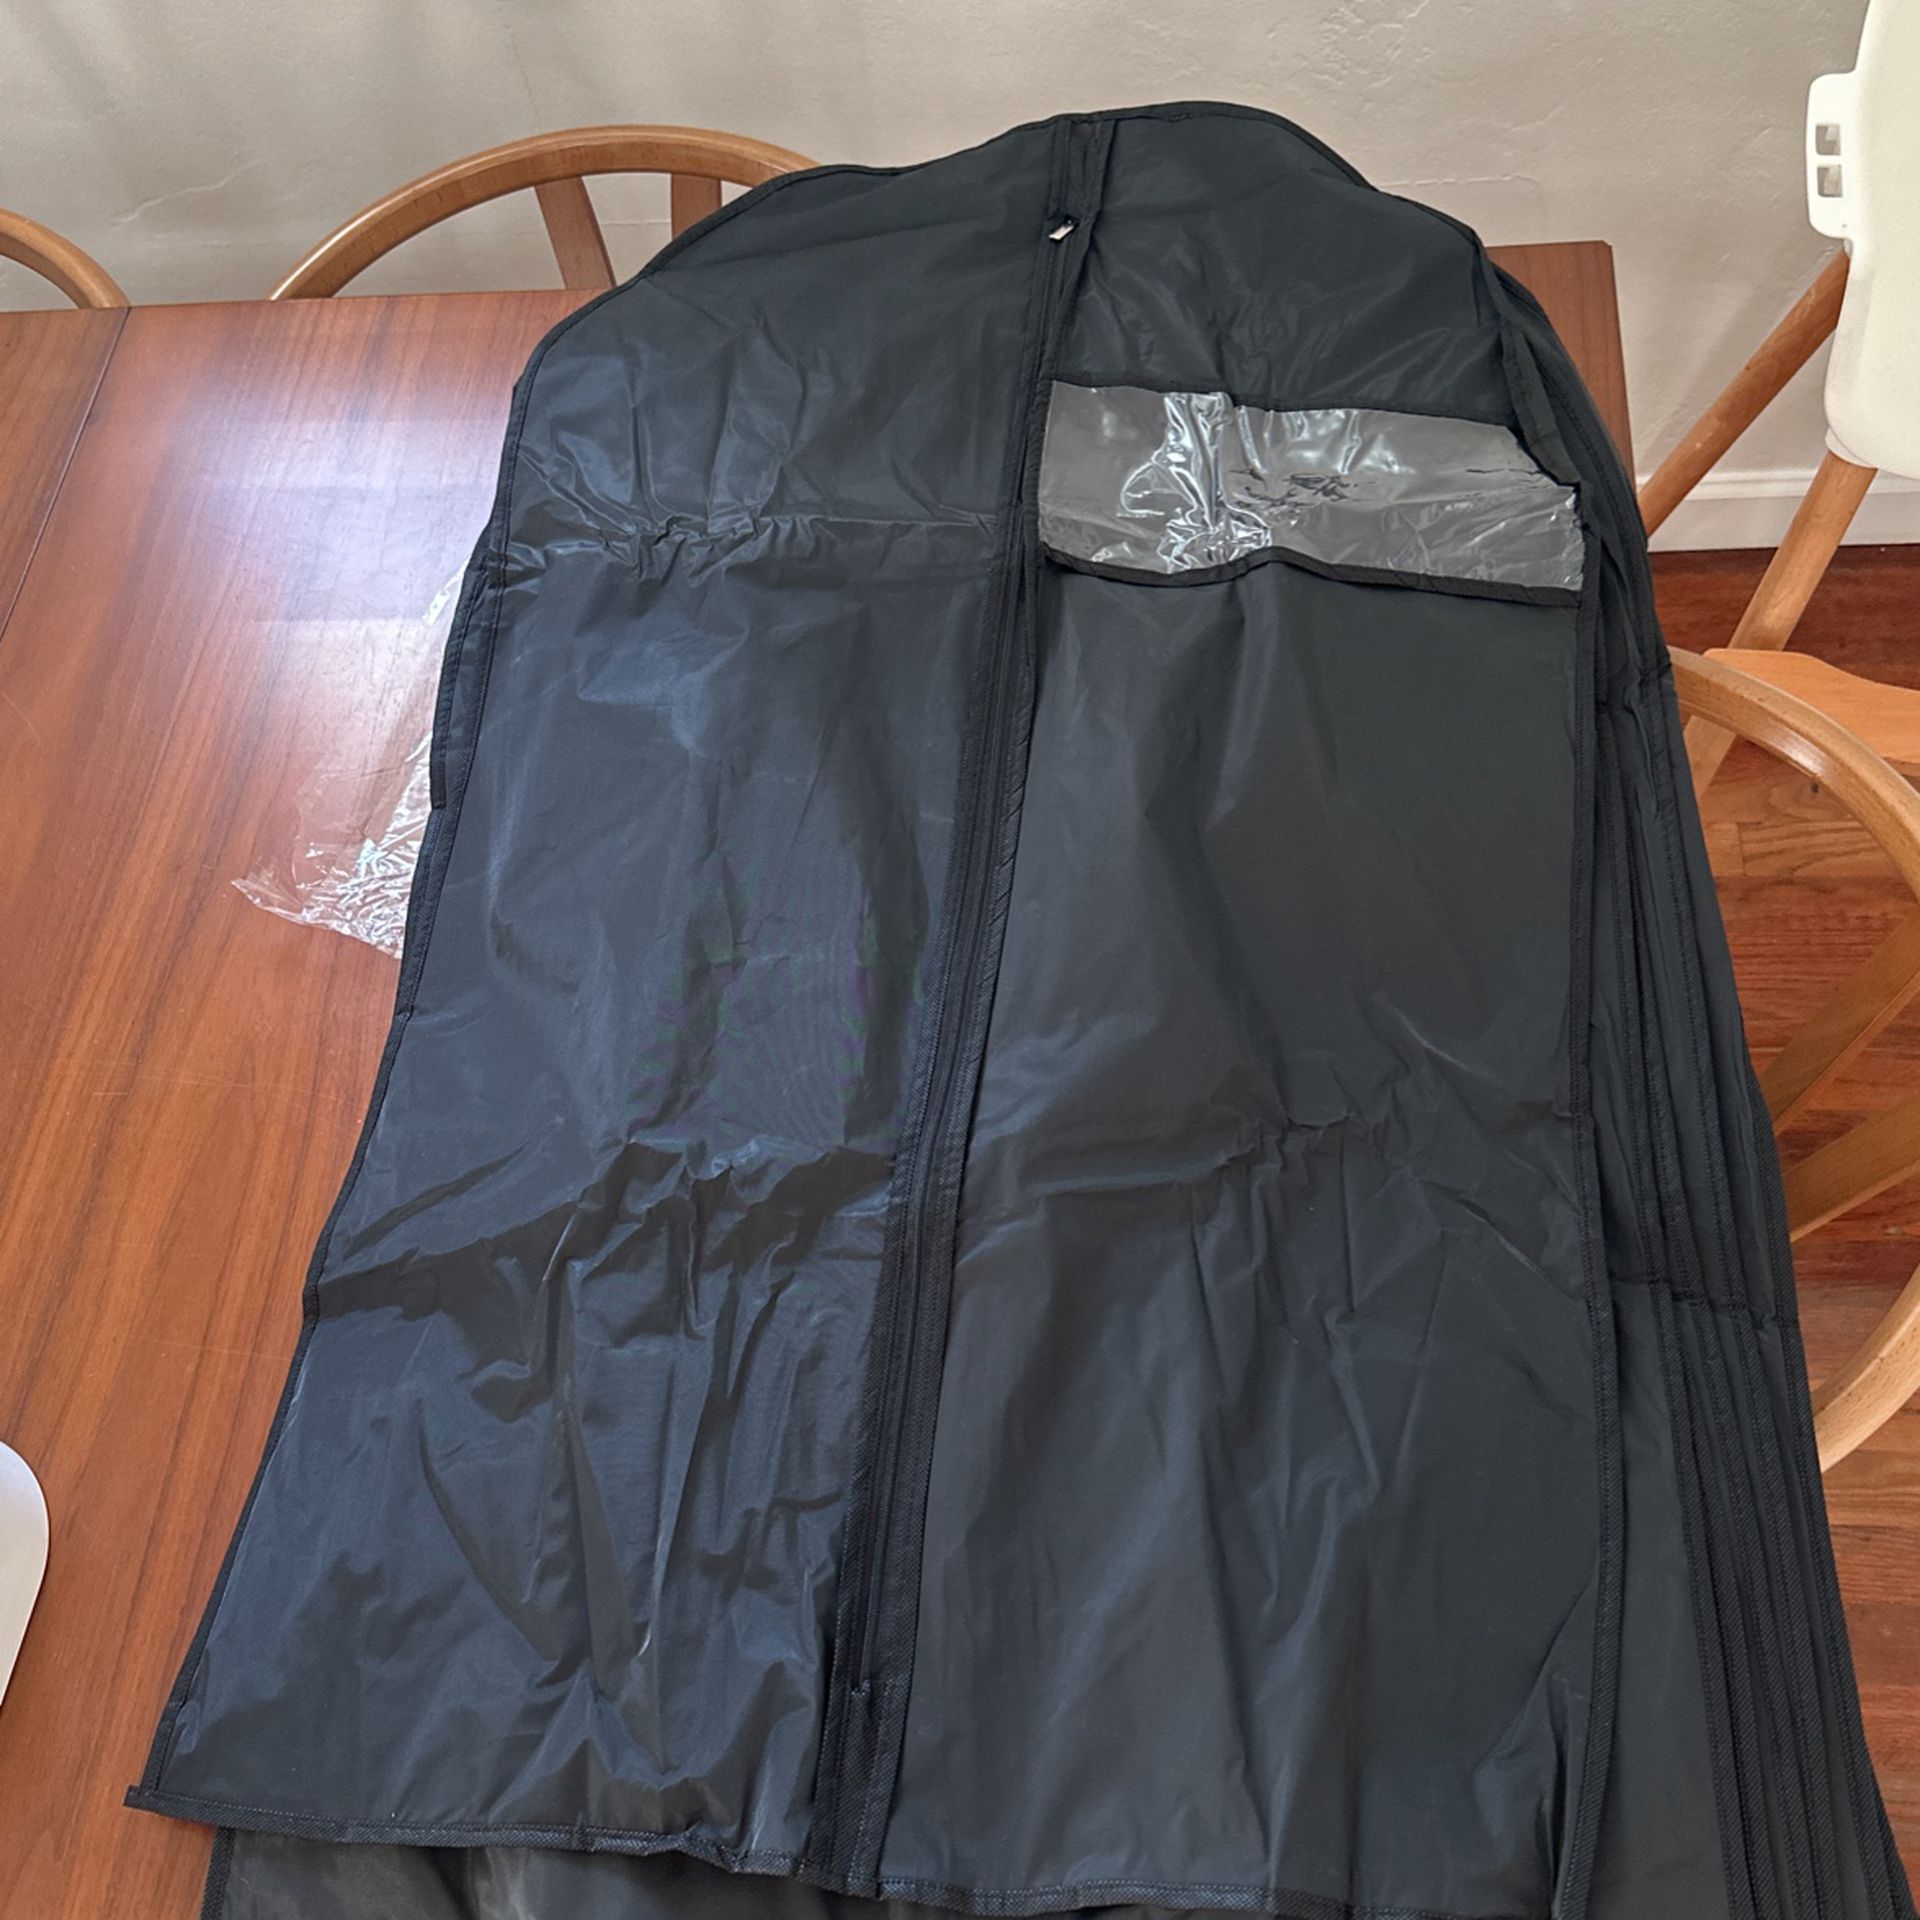 12 Pack Of Suit Bags Never Used for Sale in San Diego, CA - OfferUp